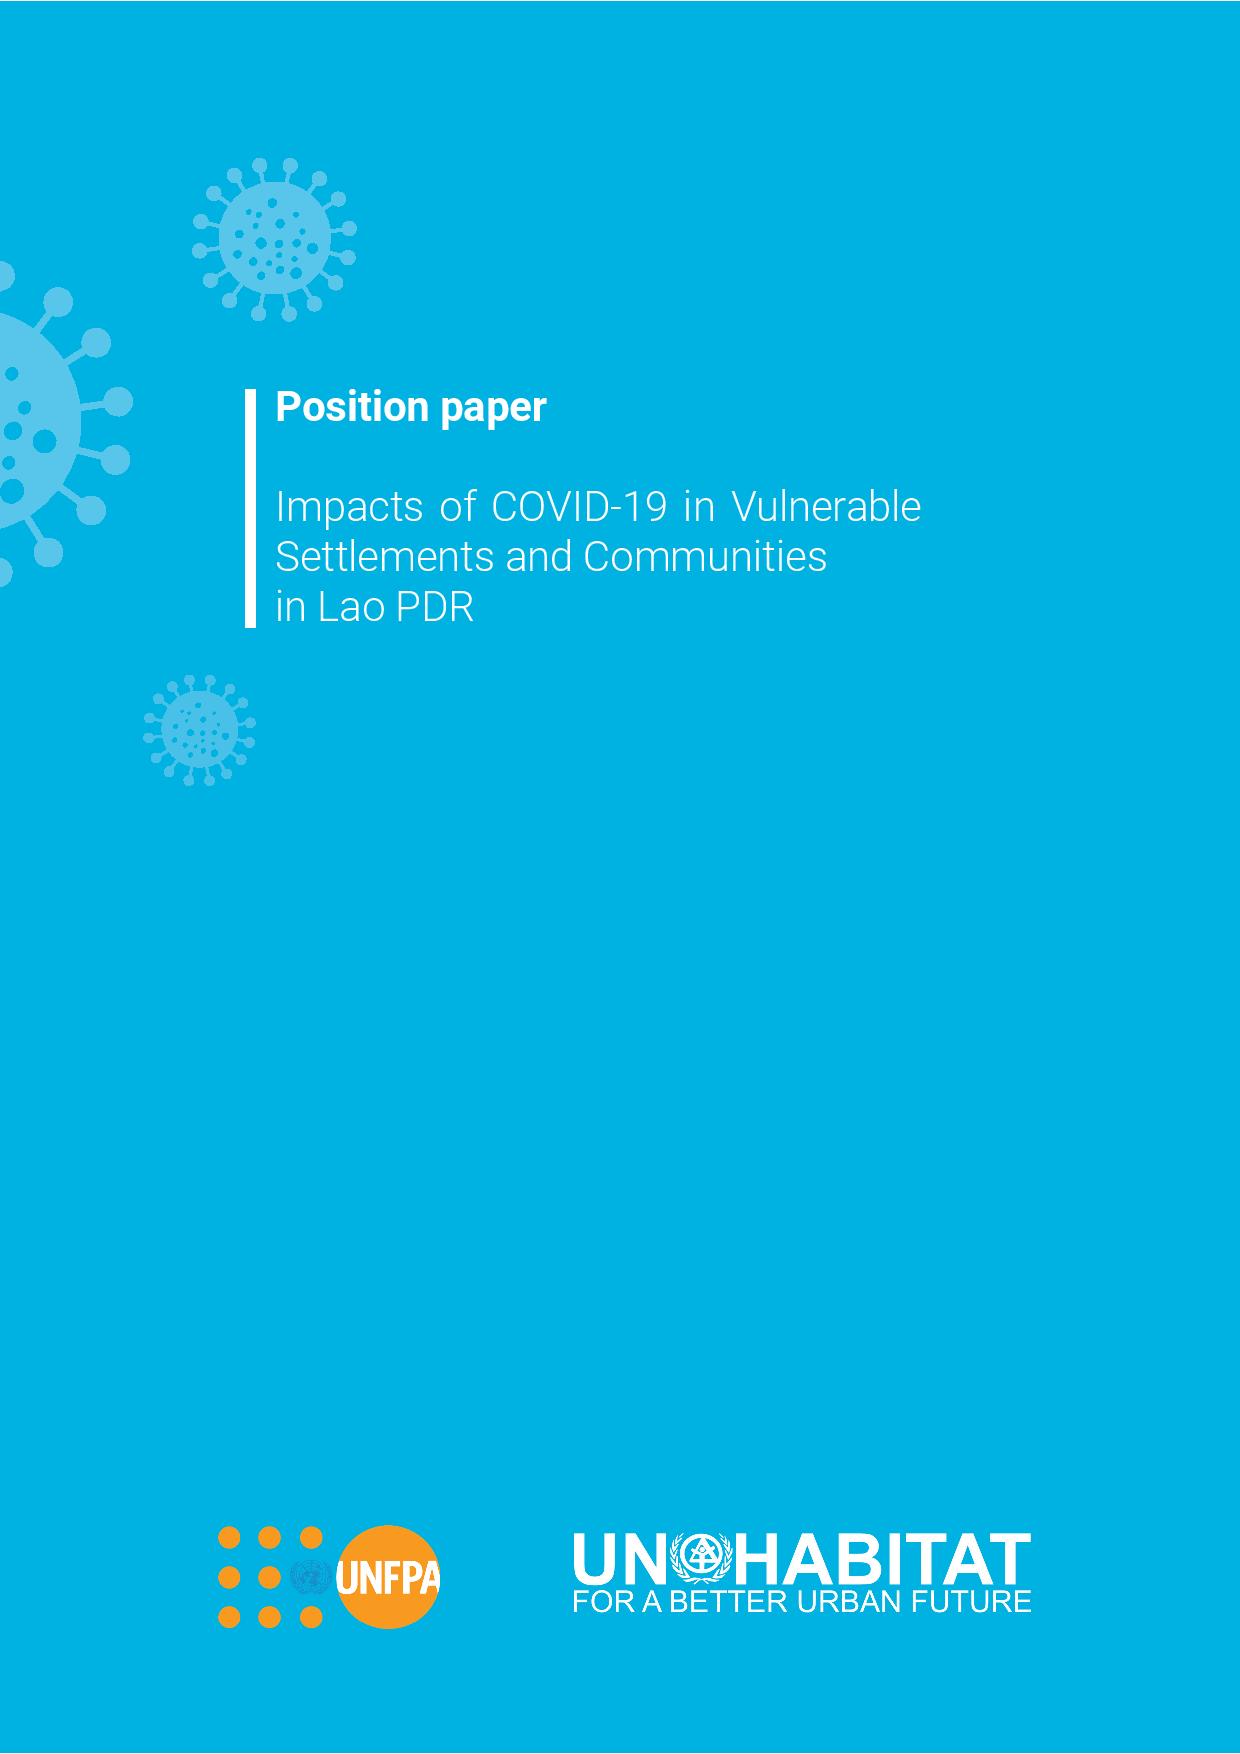 Impacts of COVID-19 in Vulnerable Settlements and Communities in Lao PDR